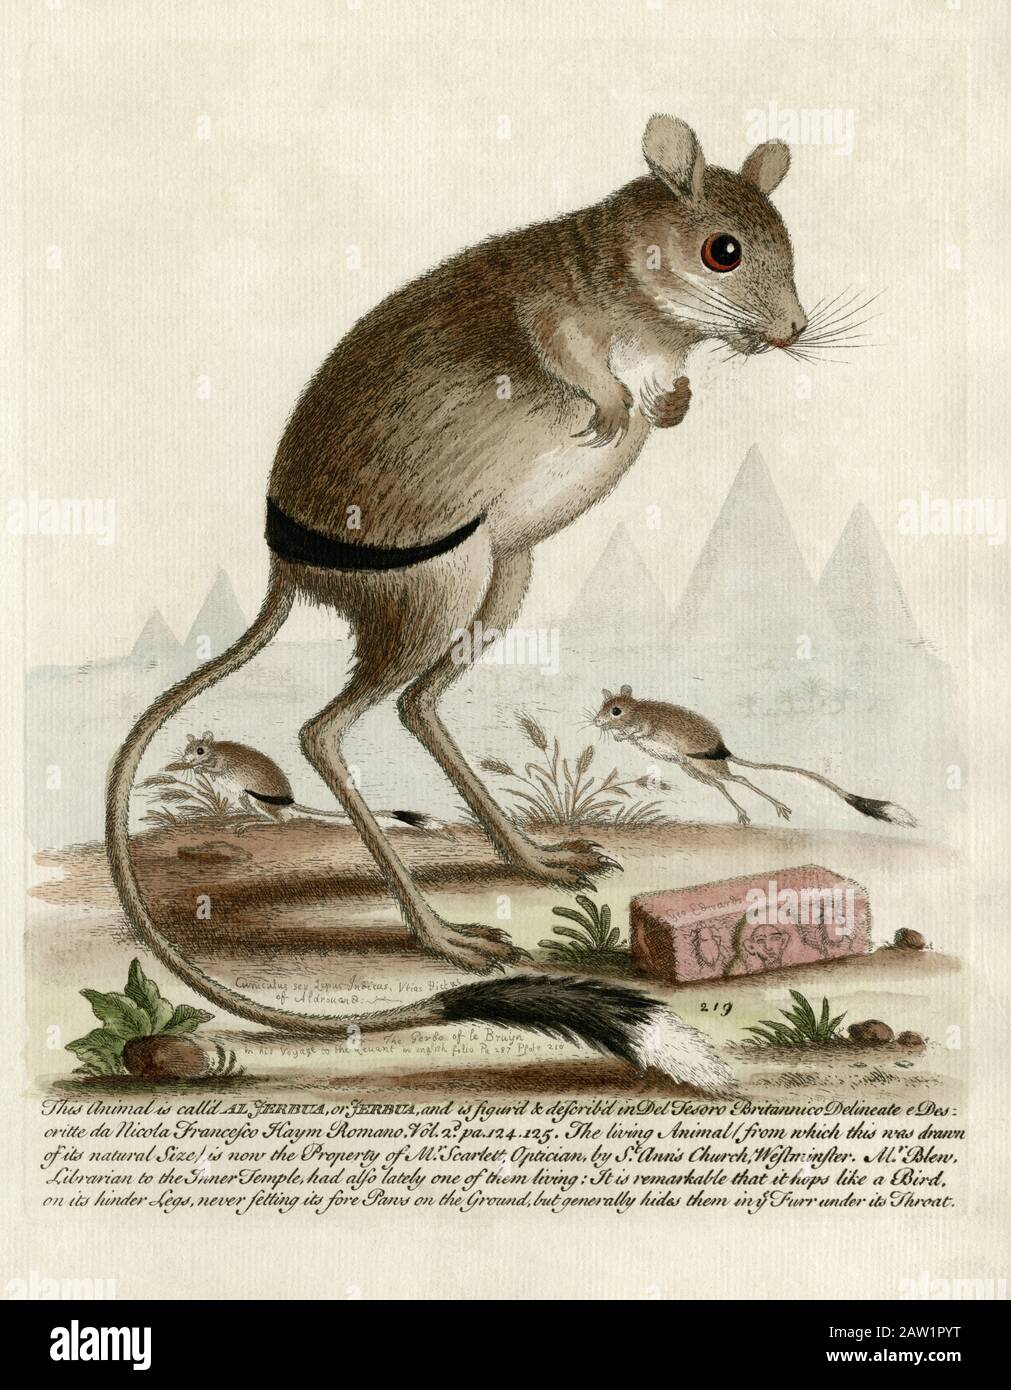 Poised jerboa and leaping jerboas, drawn from life by English naturalist and ornithologist, George Edwards (1694 - 1773).  Coloured engraving created in 1752.  Edwards’ caption explains that the jerboa model for his drawings 'is now the Property of Mr. Scarlett, Optician, by St. Ann’s Church, Westminster', while 'Mr. Blew, Librarian to the Inner Temple, had also lately one of them living'.  Edwards then adds the observation:  'It is remarkable that it hops like a Bird, on its hinder Legs, never setting its fore Paws on the Ground, but generally hides them in ye Furr under its Throat'. Stock Photo